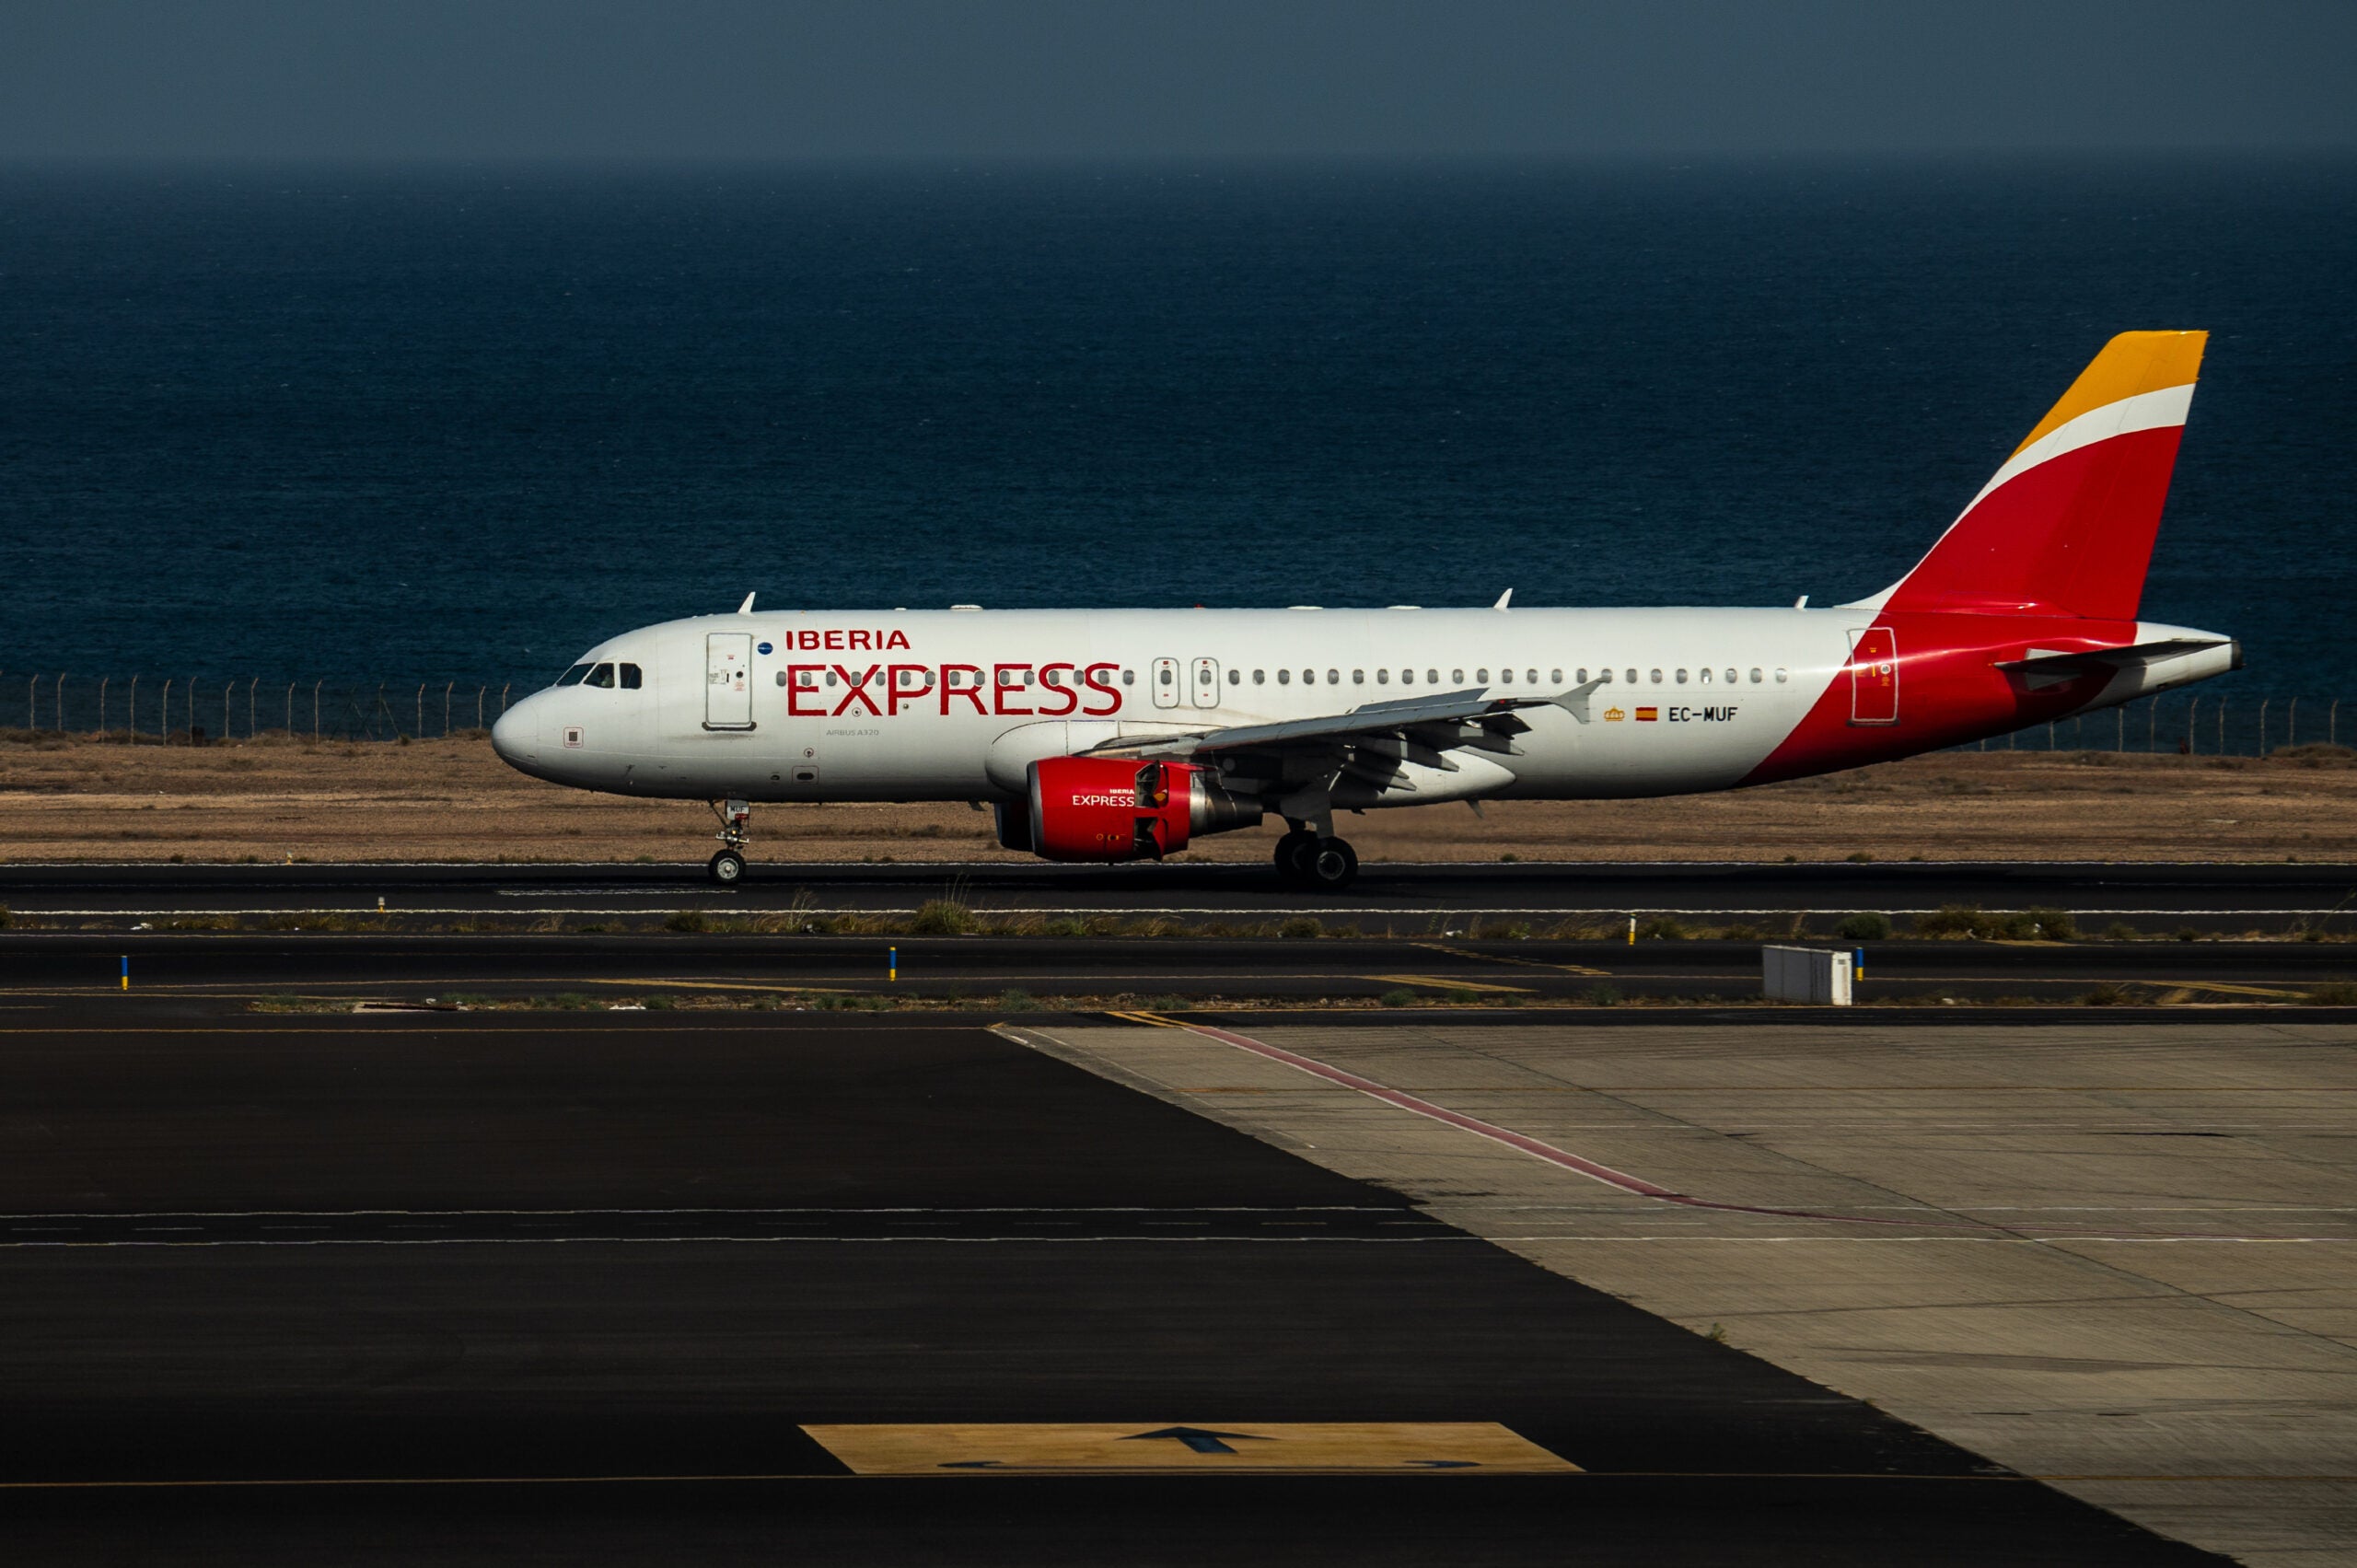 Iberia Express airplane lands in the Cesar Manrique Airport